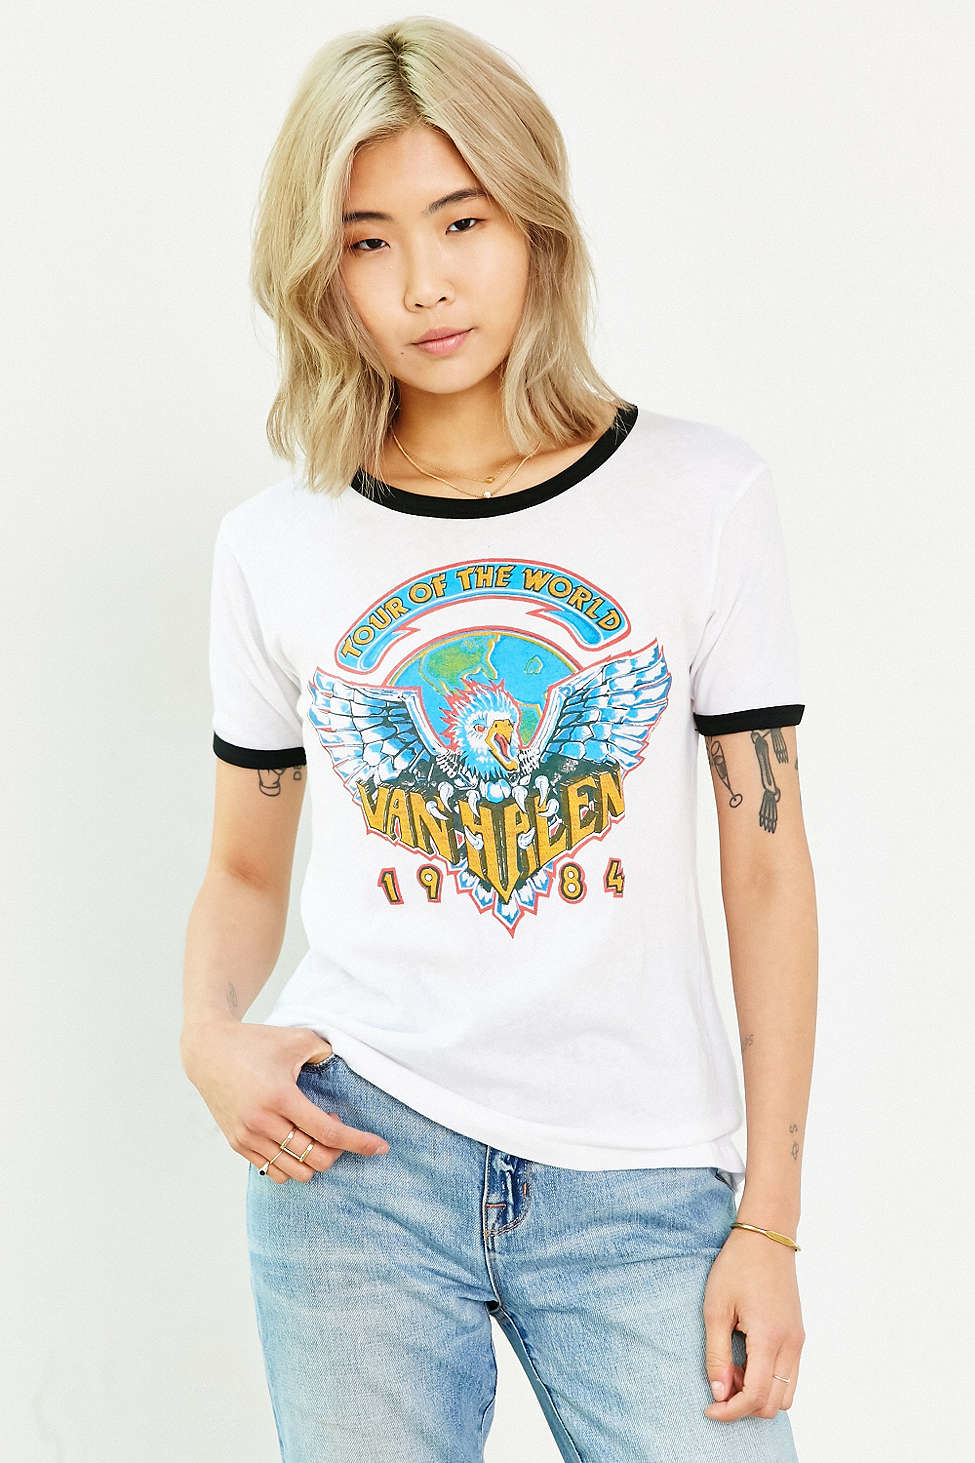 Wholesalers rock band tees urban outfitters clothing line boys